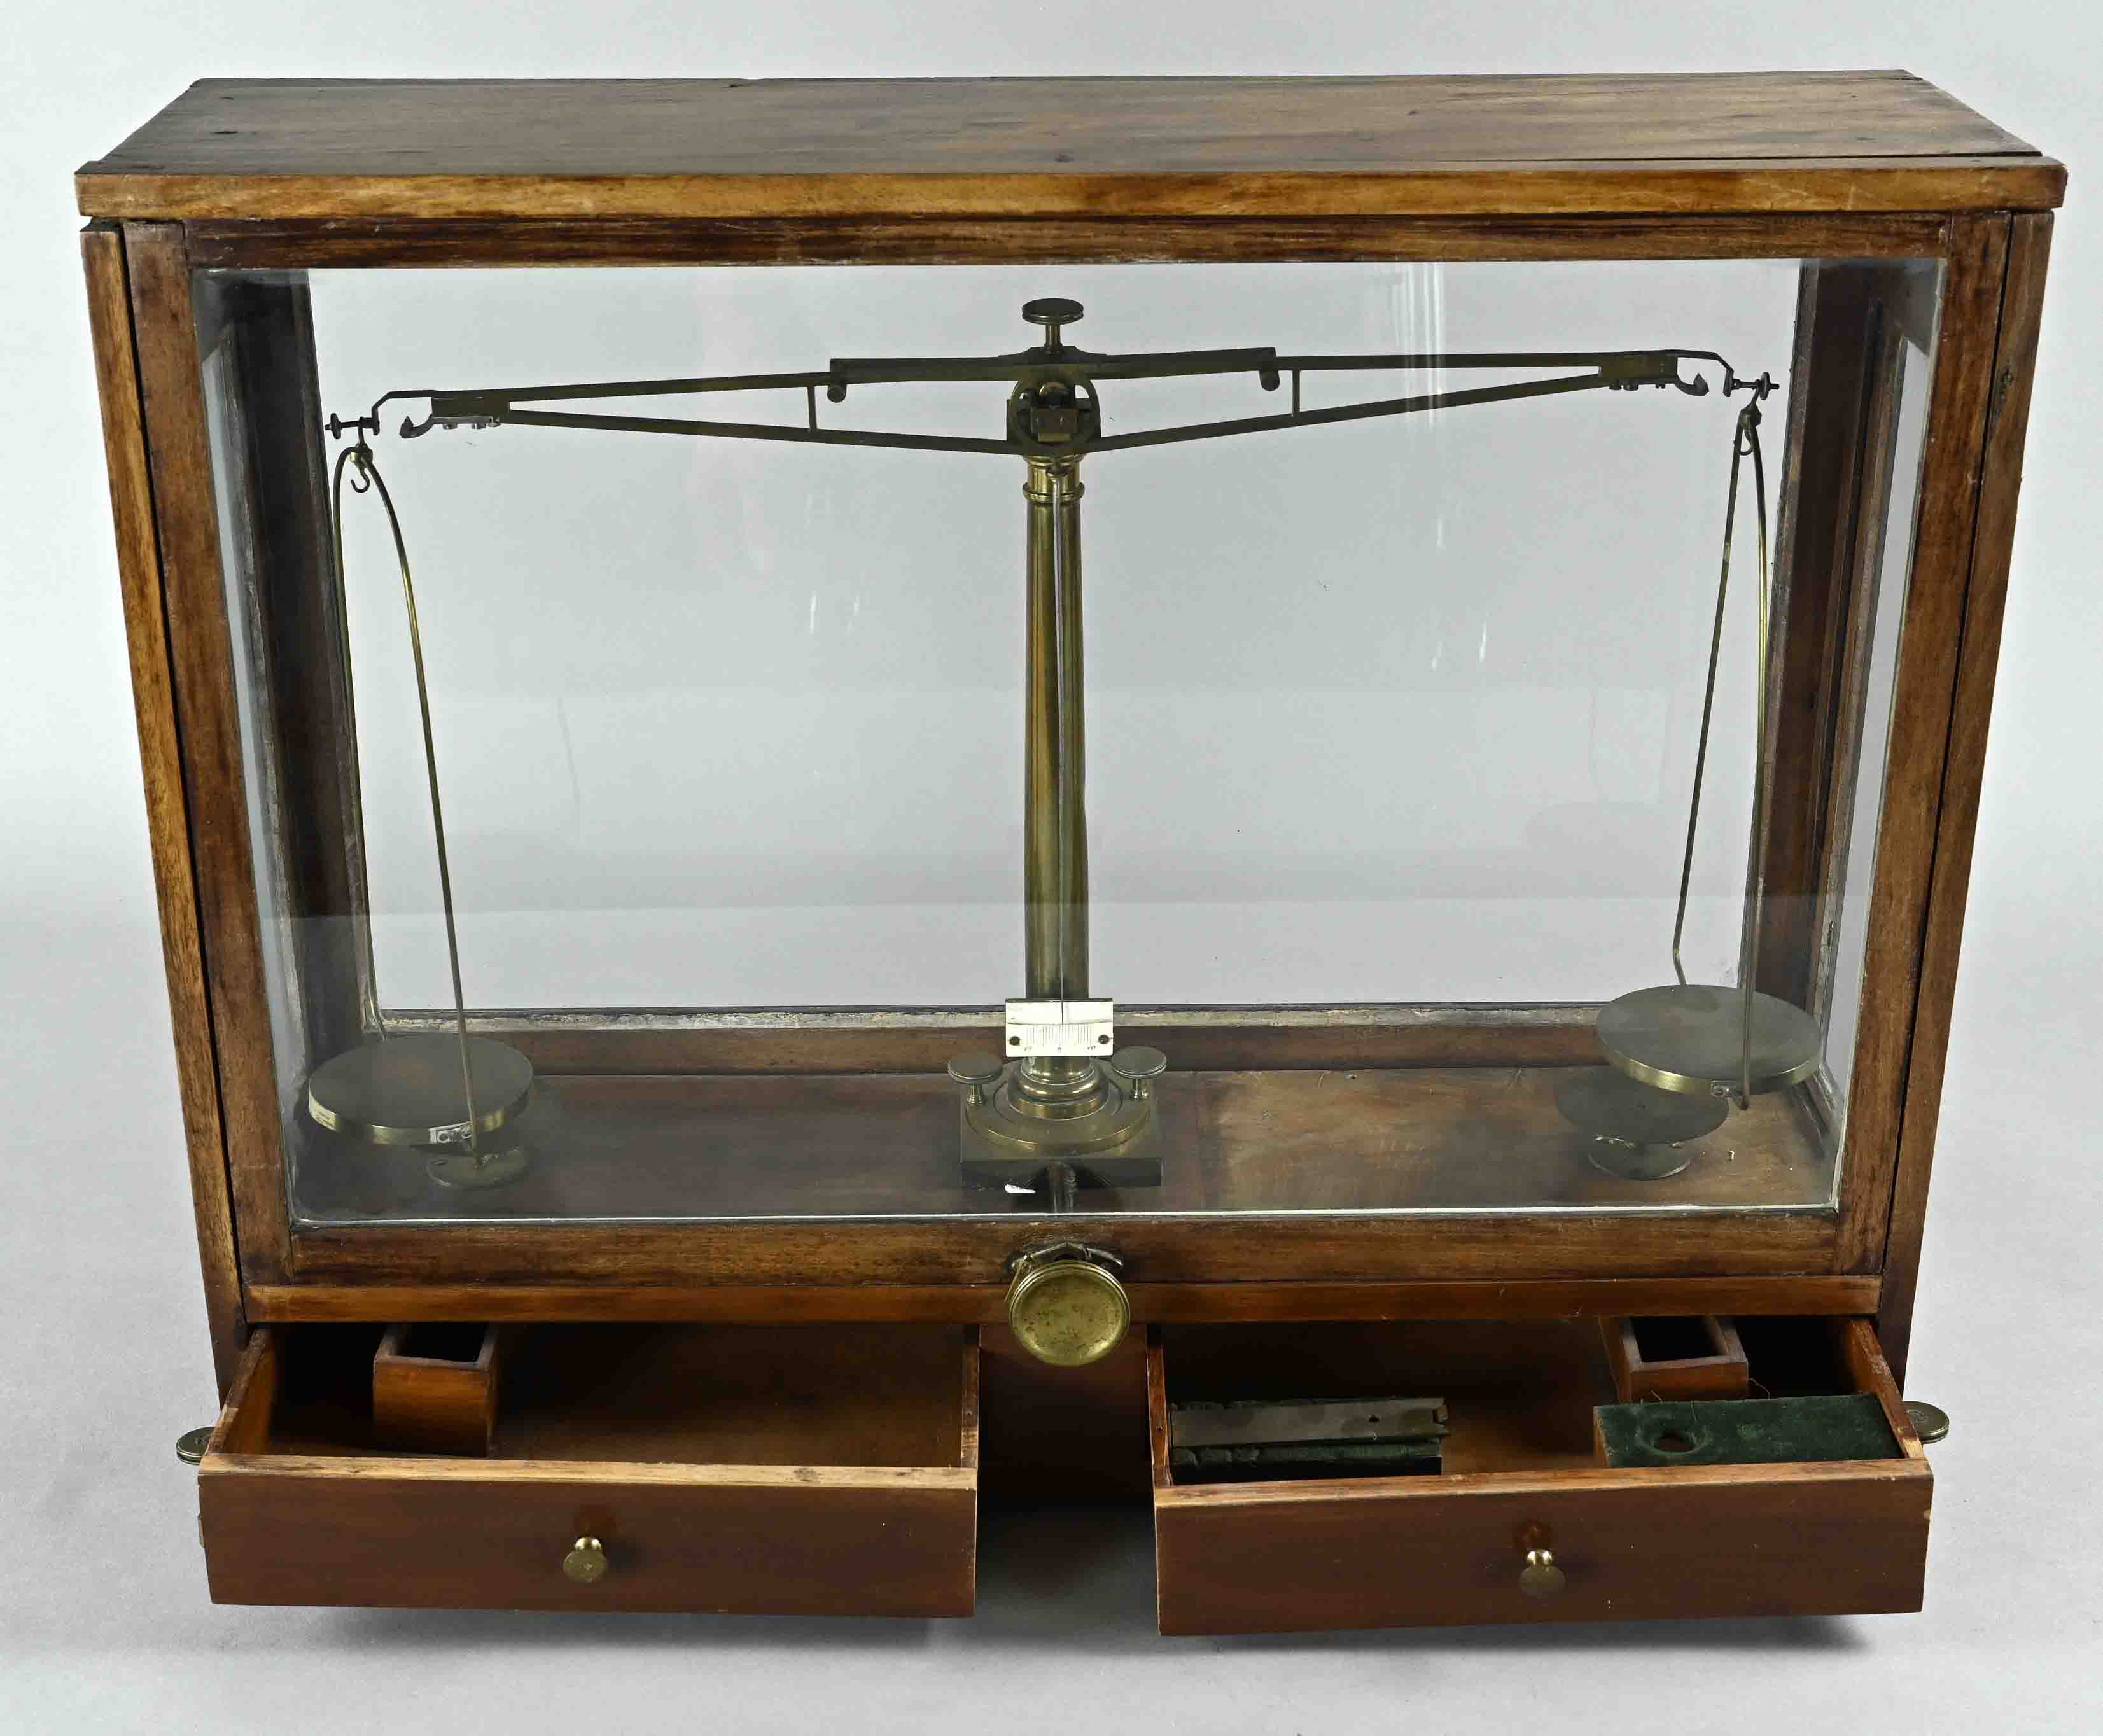 Precision balance, German, 2nd half of the 19th century, wood with glass case, height 48.5 x 60 x 1 - Image 3 of 3